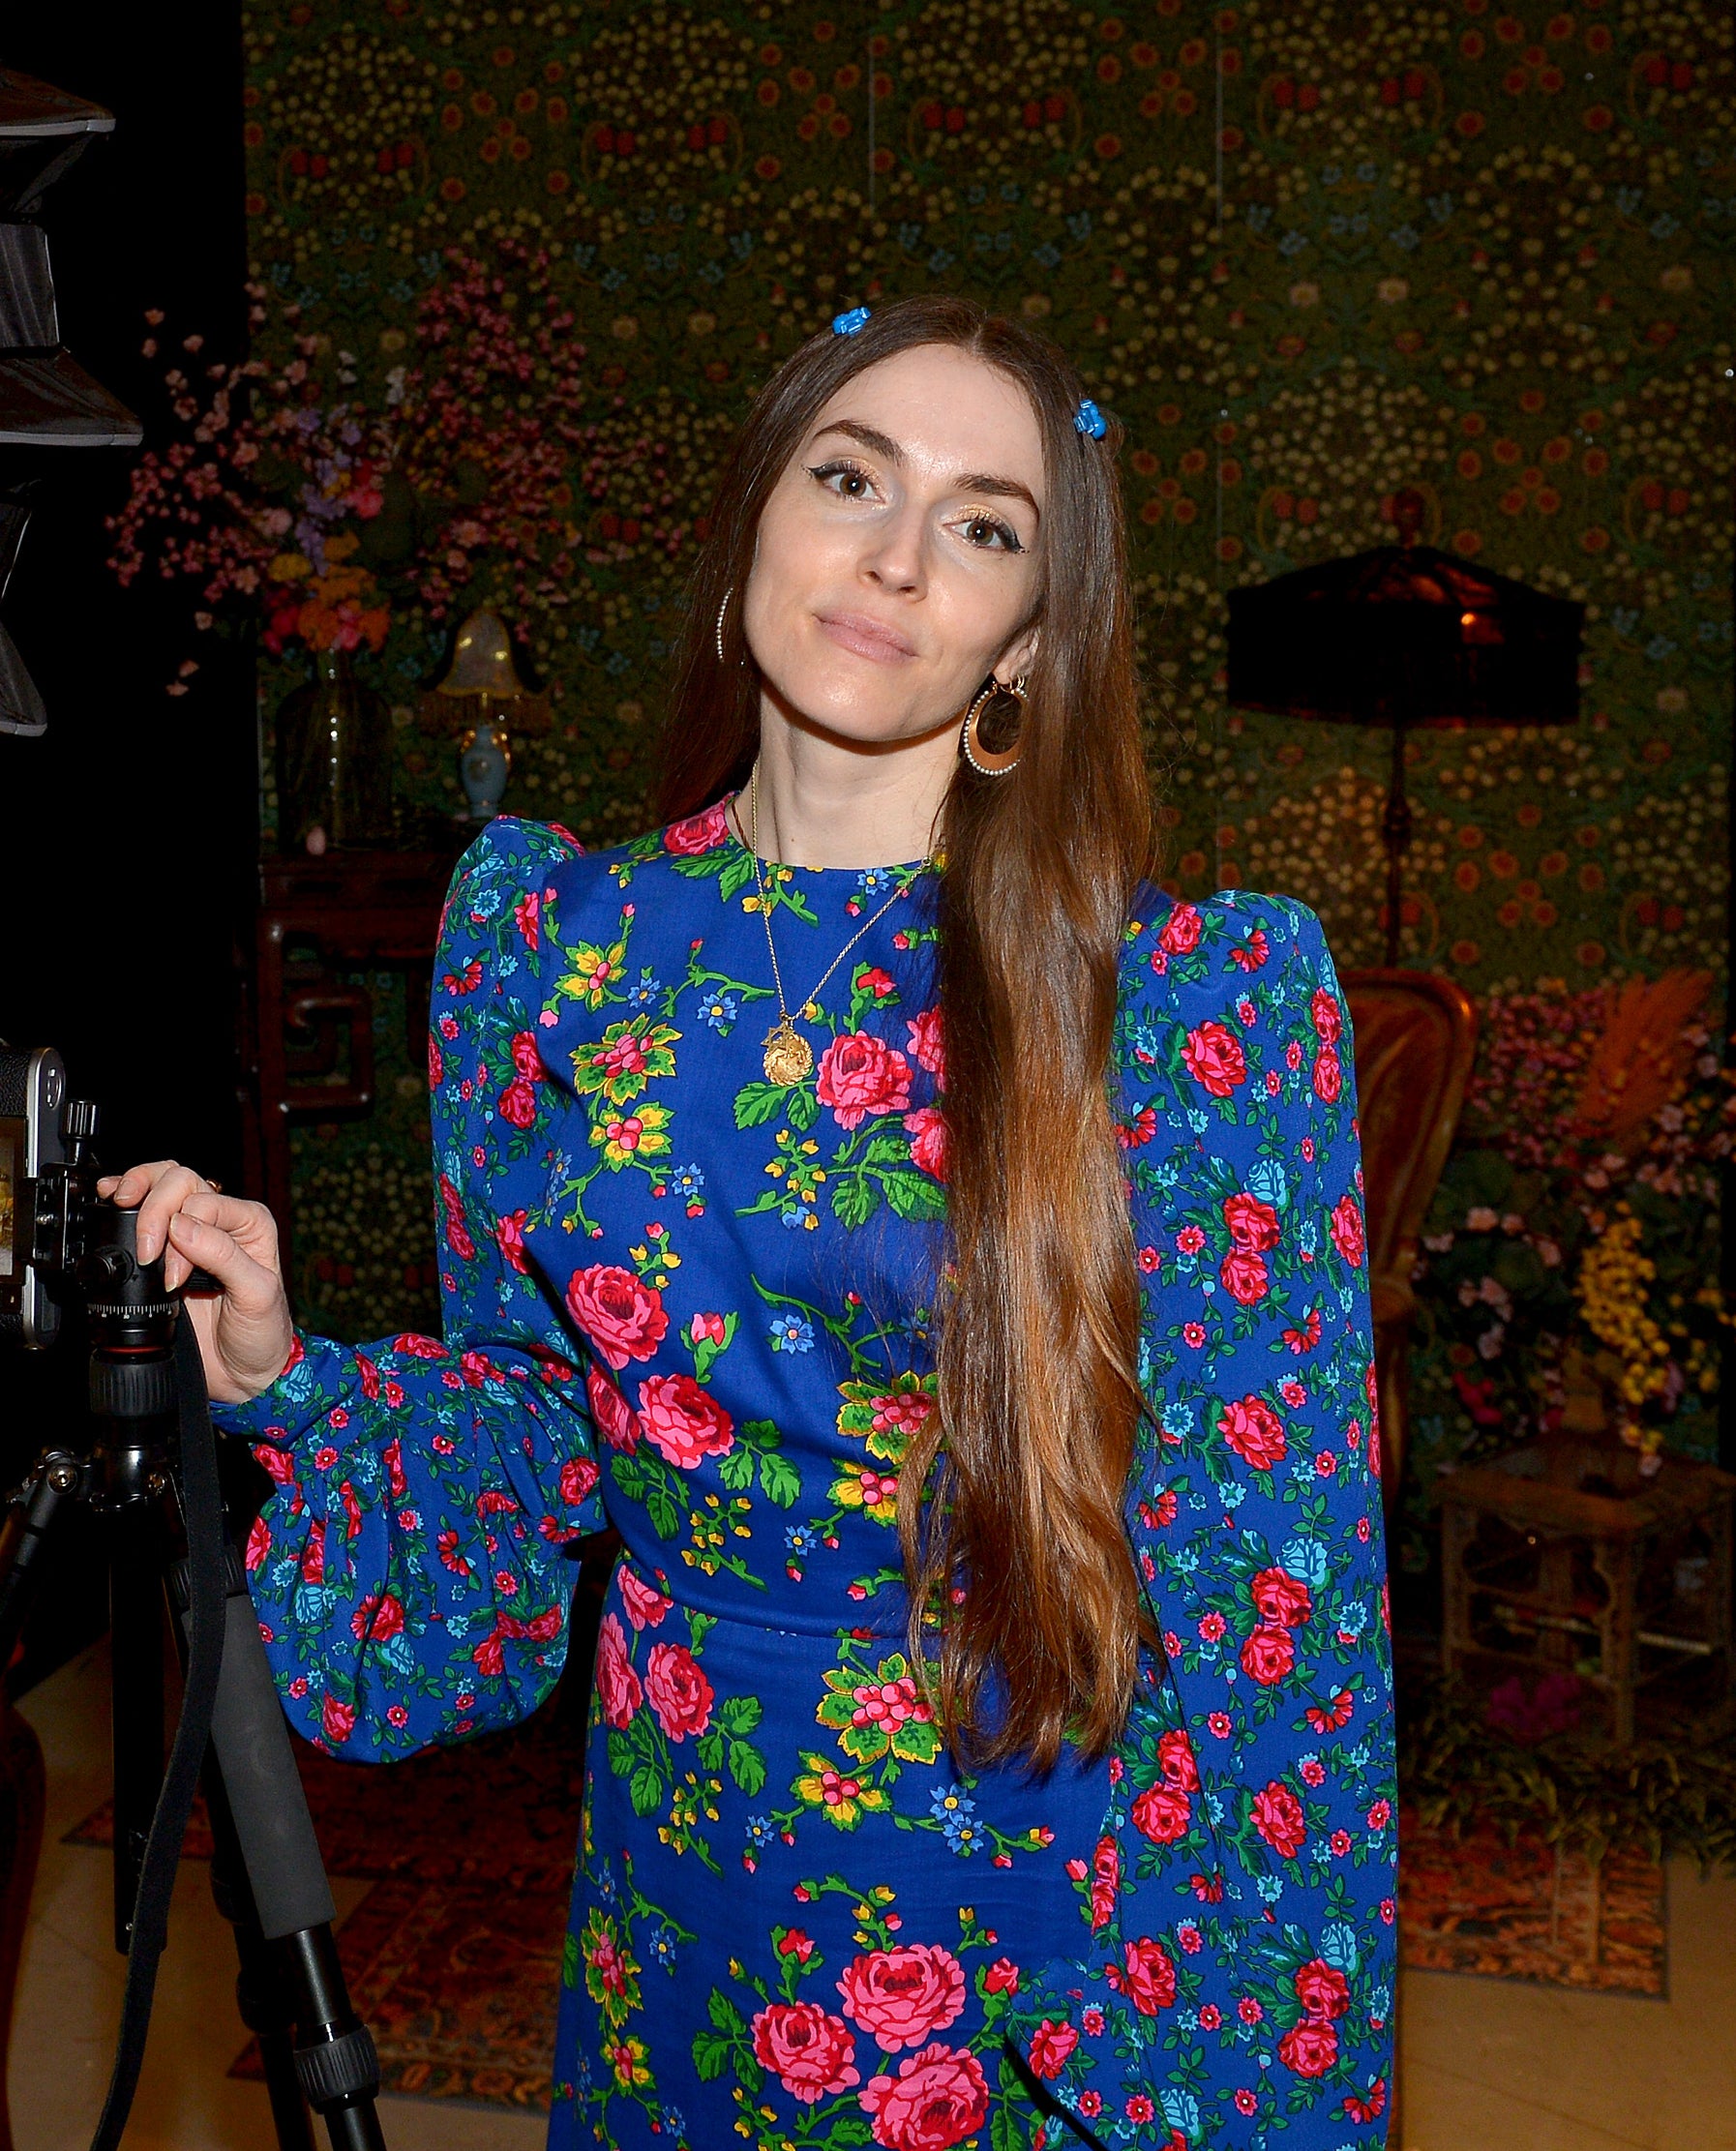 Anna Marie in a floral dress stands by a camera and lighting equipment, slightly smiling